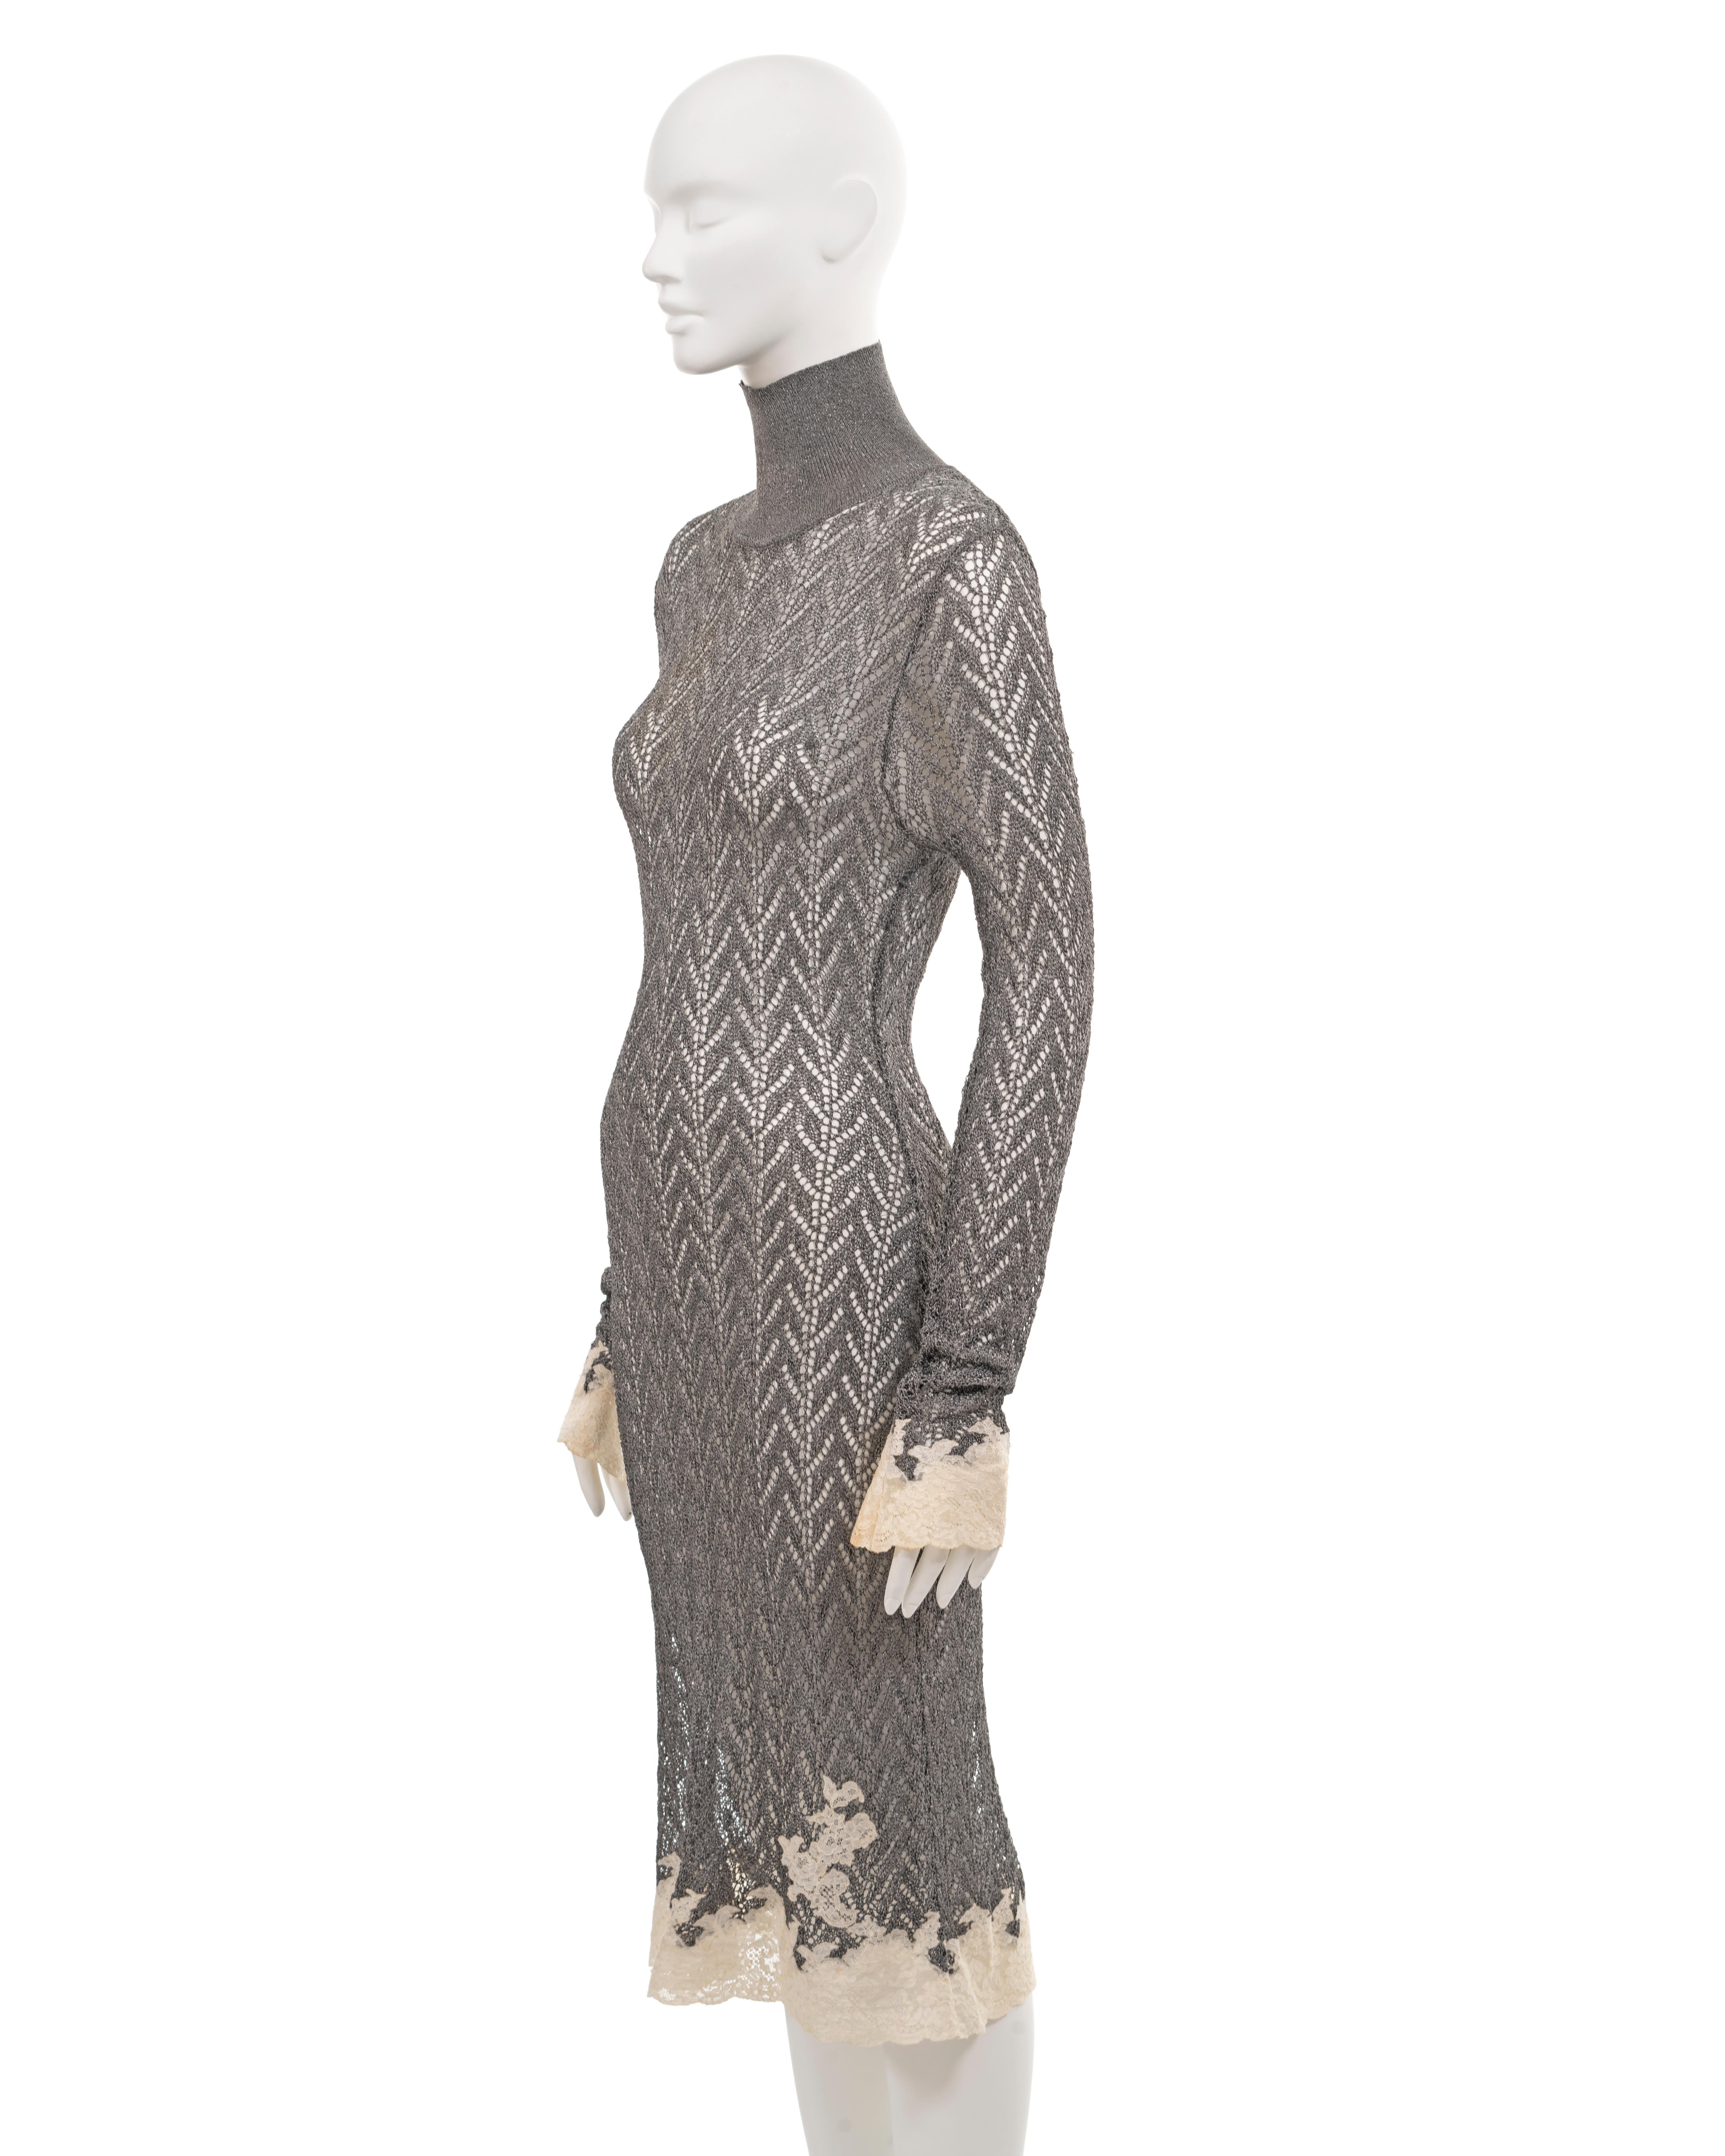 Christian Dior by John Galliano silver open-knit dress with lace trim, fw 1998 For Sale 1